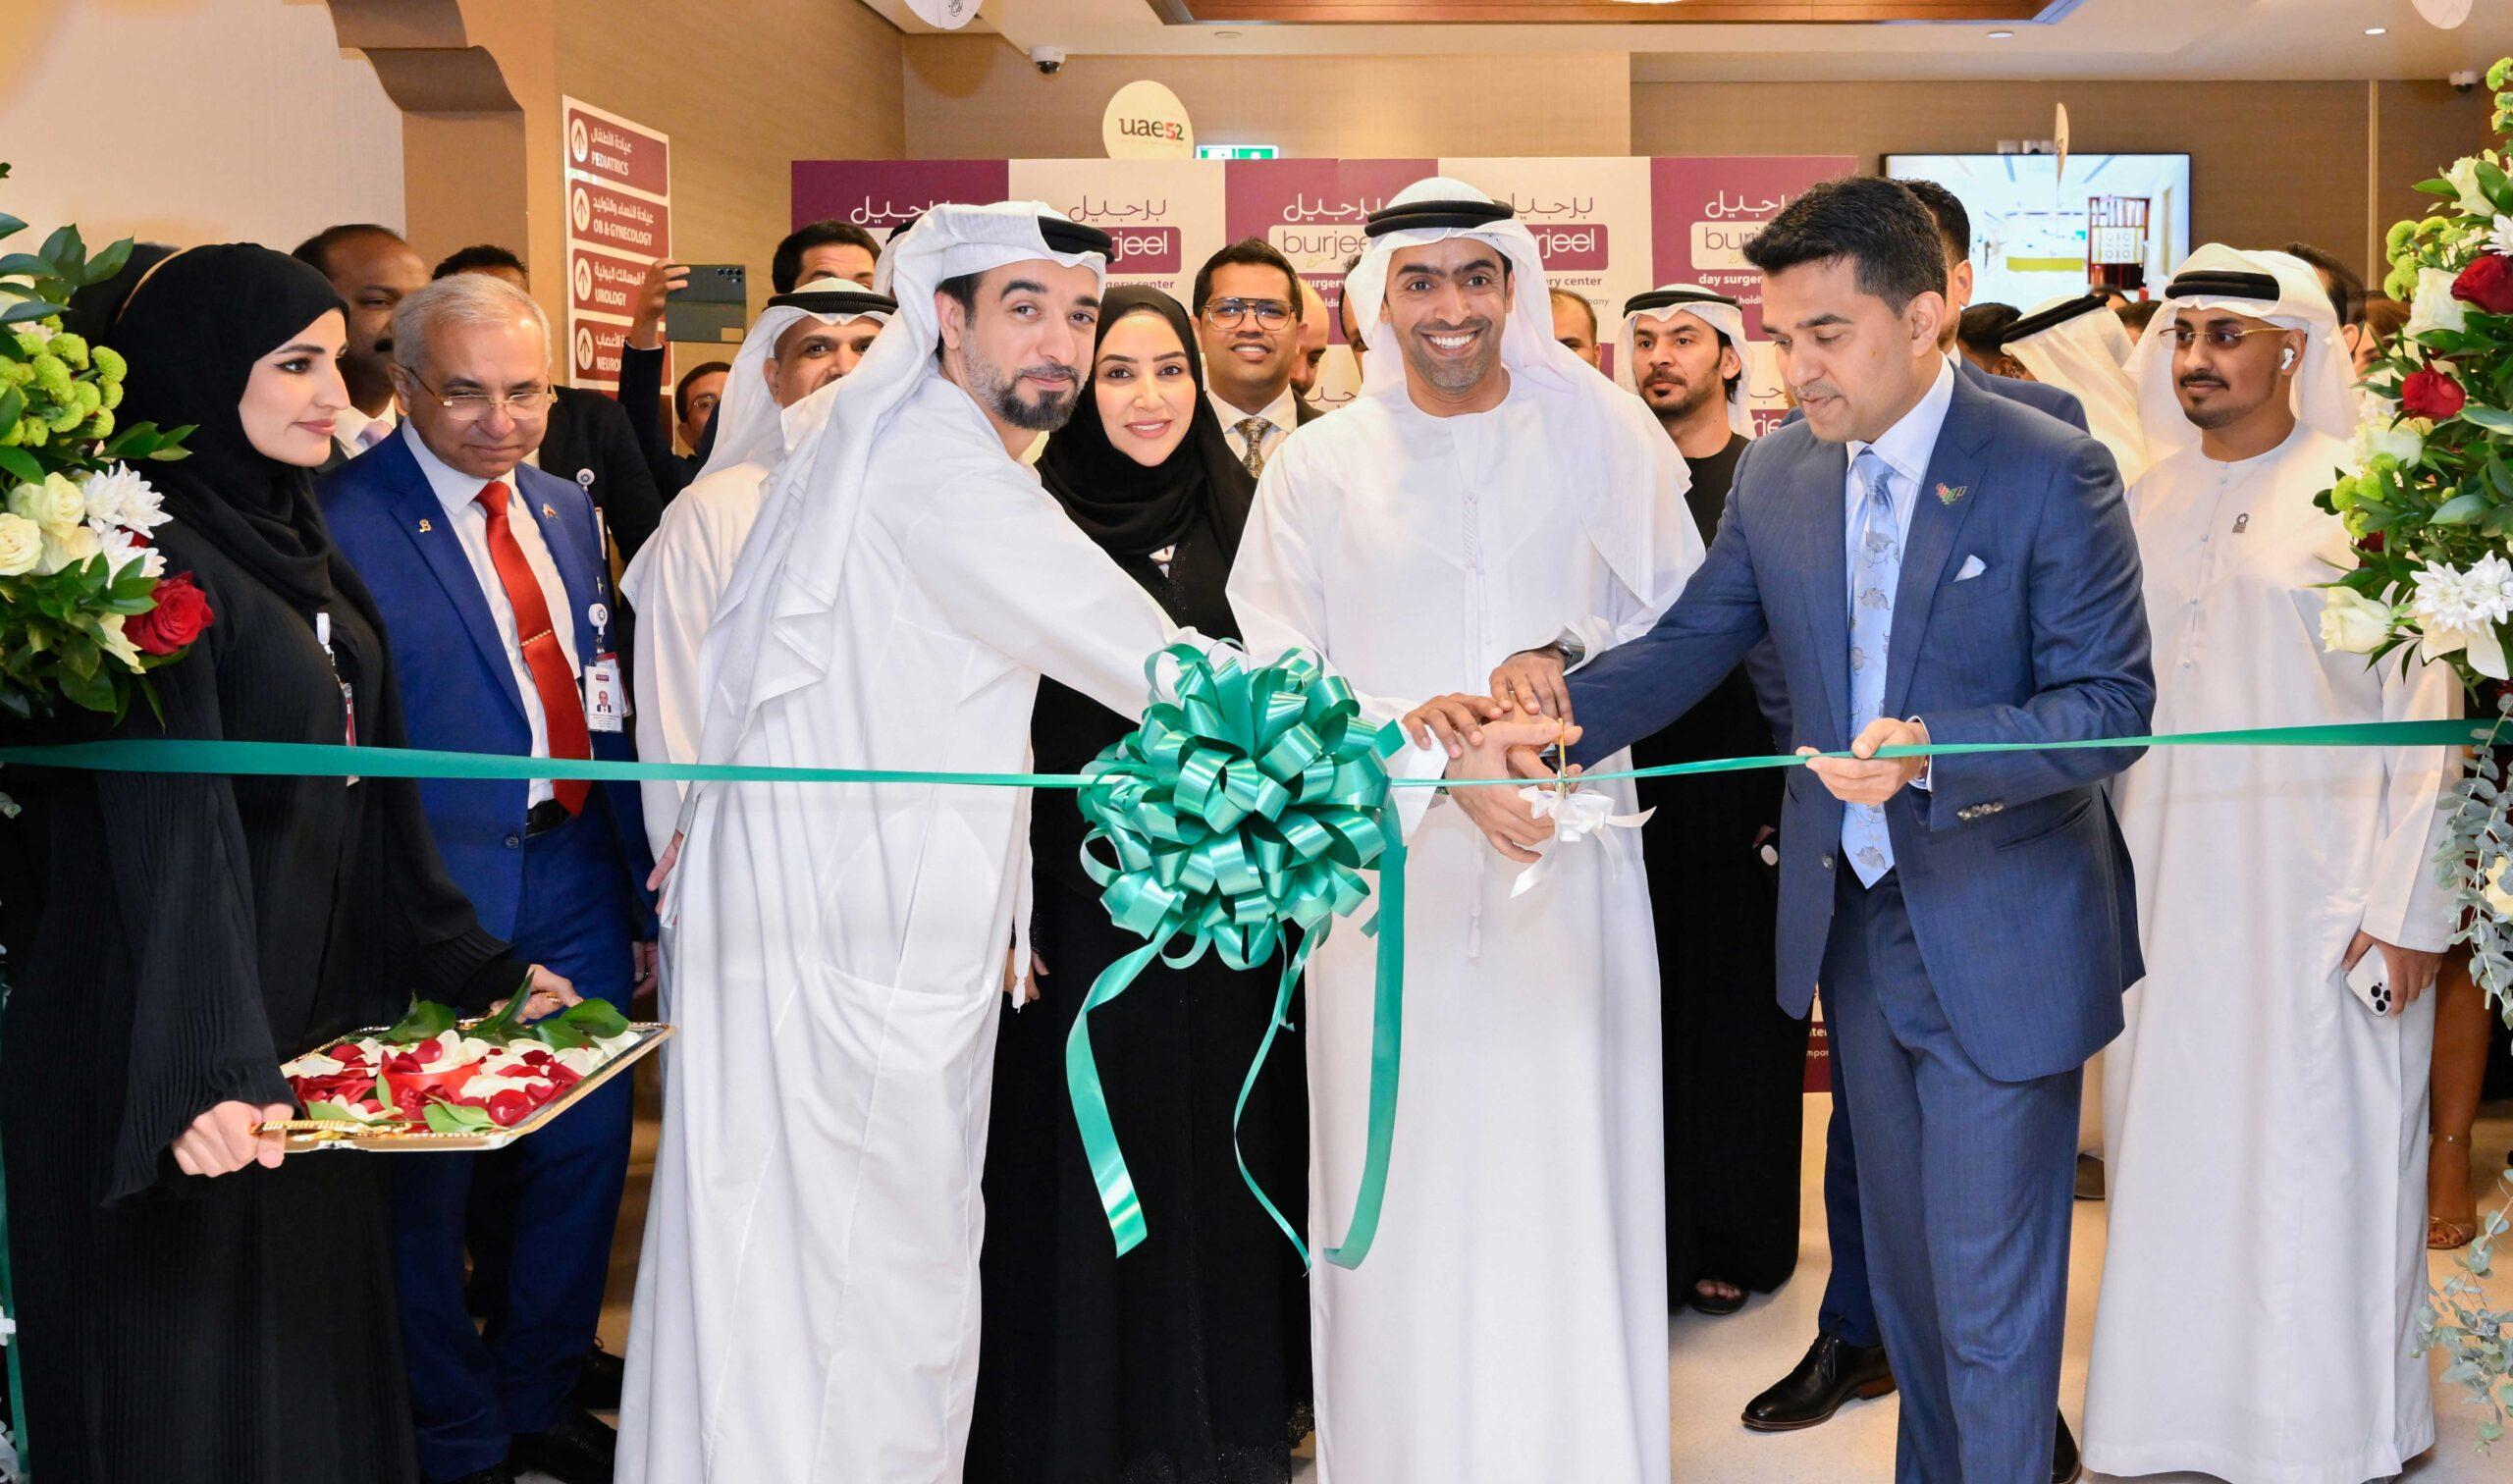 Burjeel Holdings Launches Advanced Day Surgery Center in Abu Dhabi’s Al Shahama